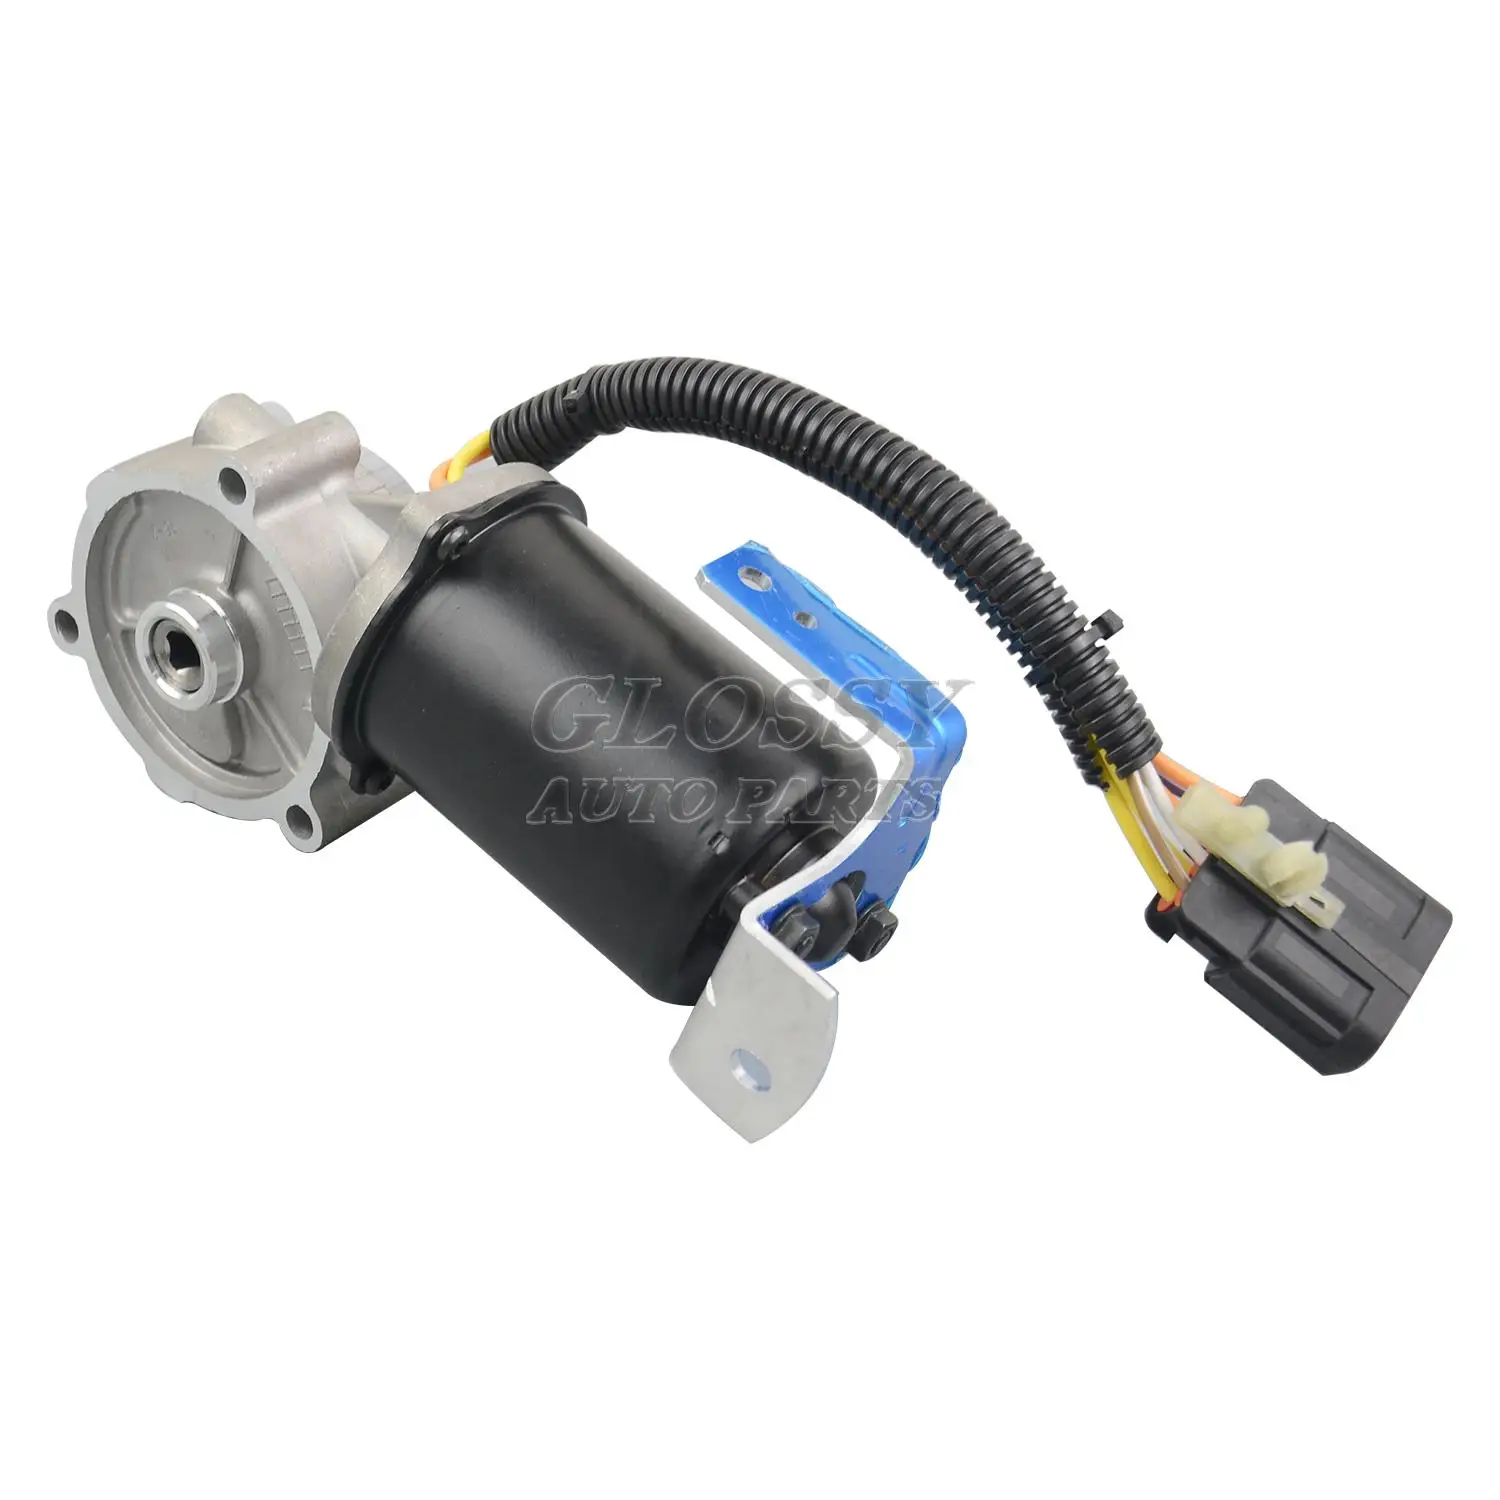 

AP02 For Hummer H2 H3 Chevy Avalanche GMC Transfer Case Actuator Shift Motor 19151453 89059688 19167720 89059551 600-908